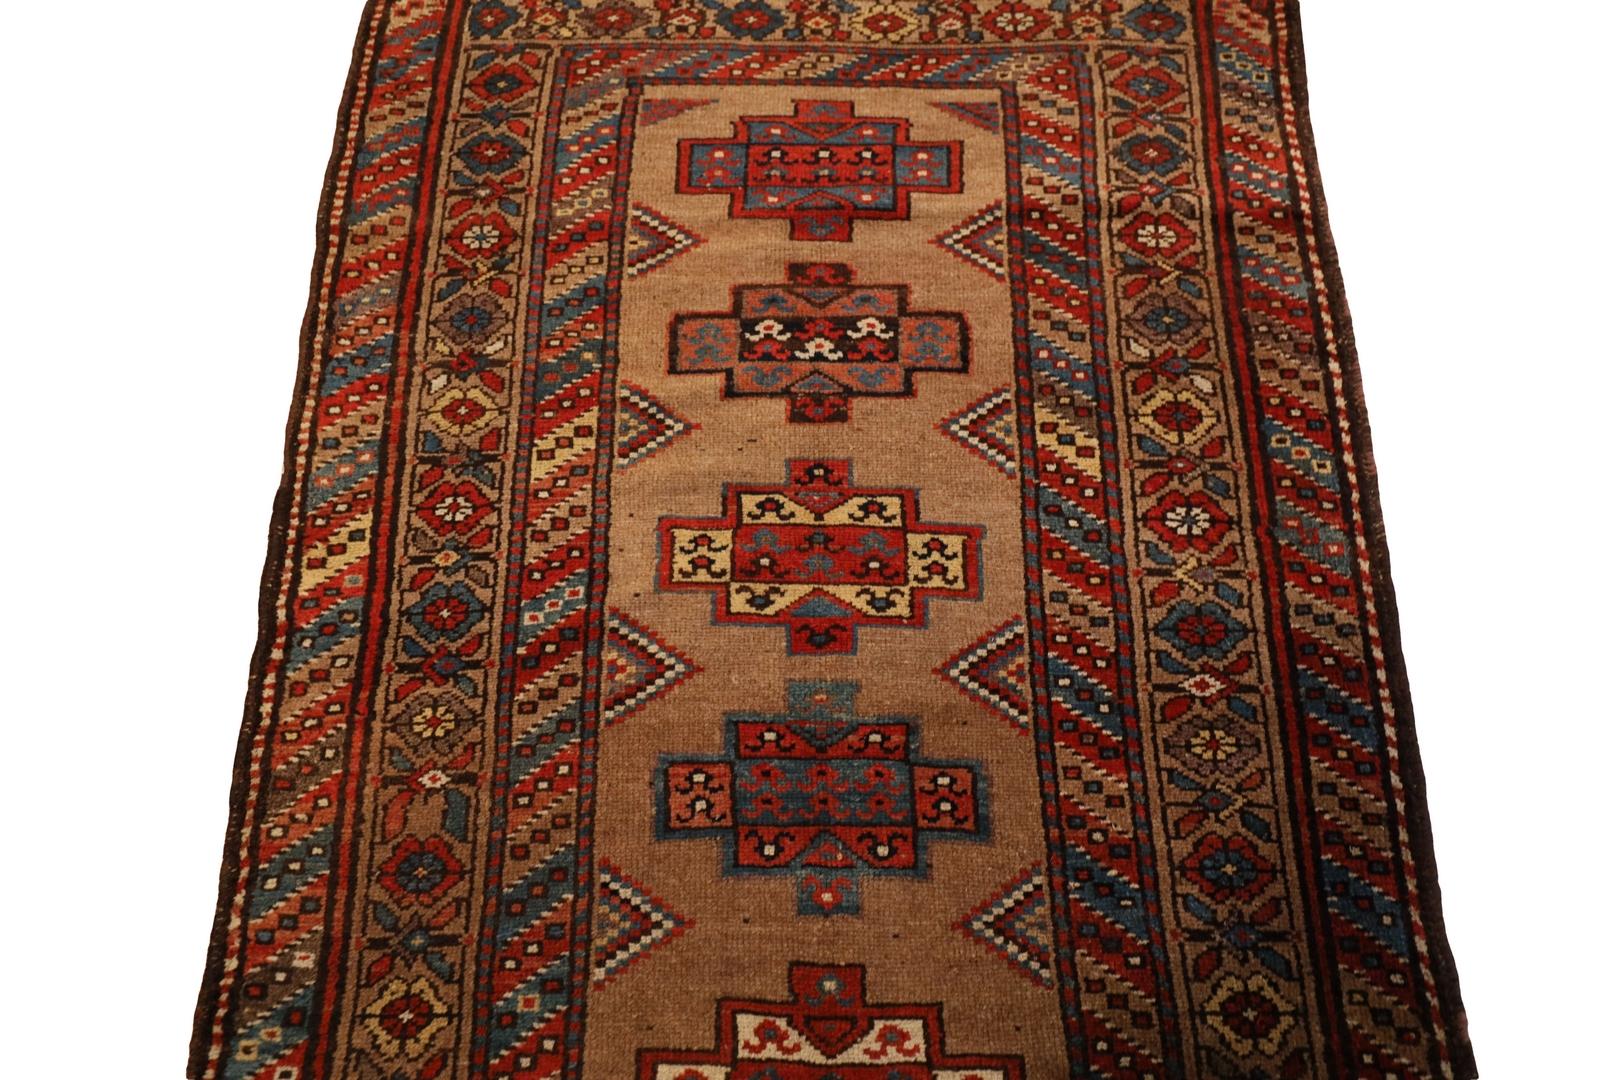 Hand-Knotted Camel-Hair Malayer Antique runner - 3'5